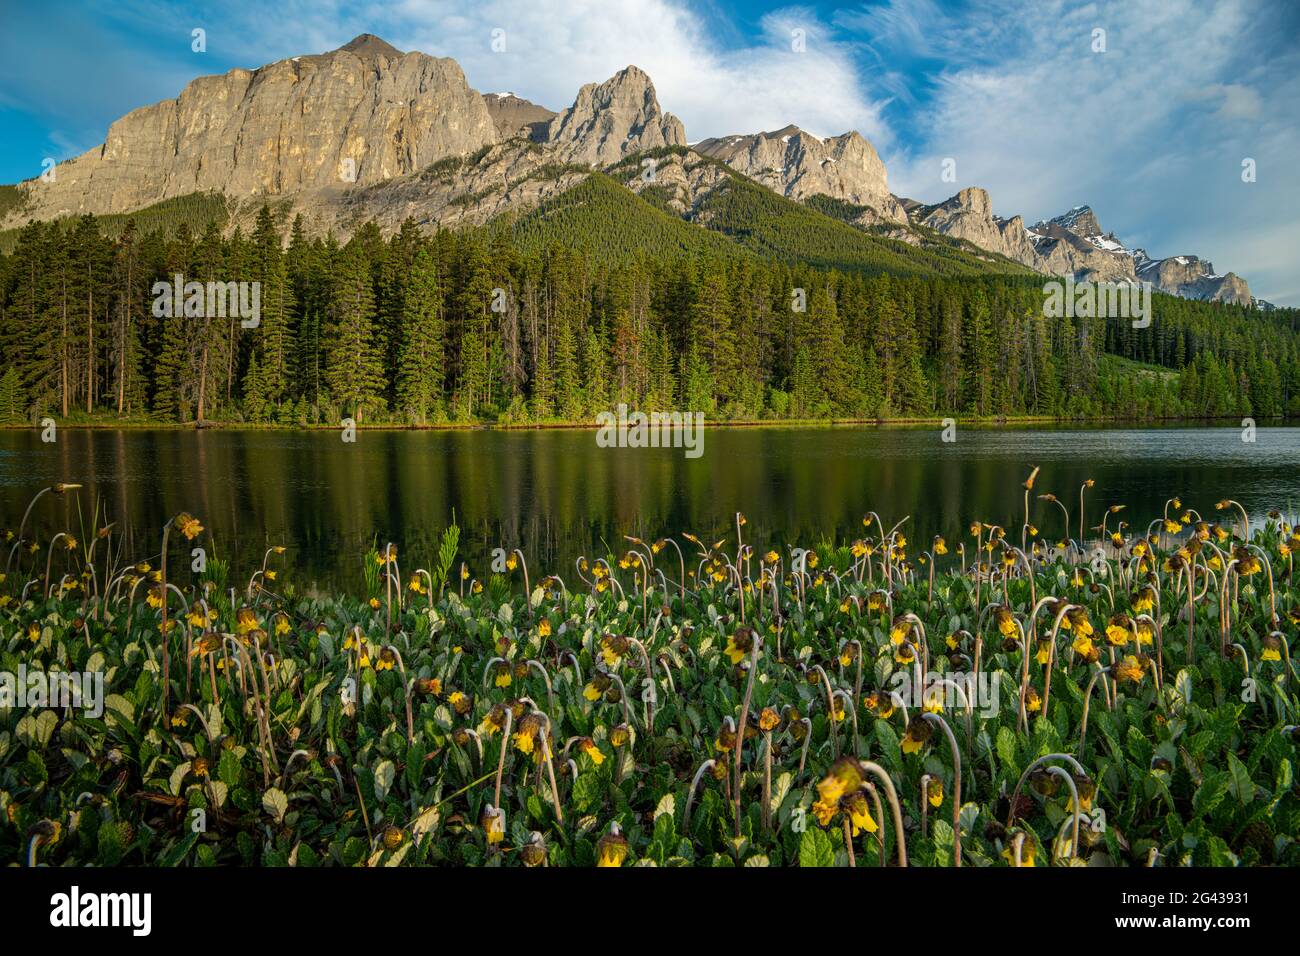 Landscape with, lake, forest and Mountain avens (Dryas octopetala) flowers, Canmore, Alberta, Canada Stock Photo